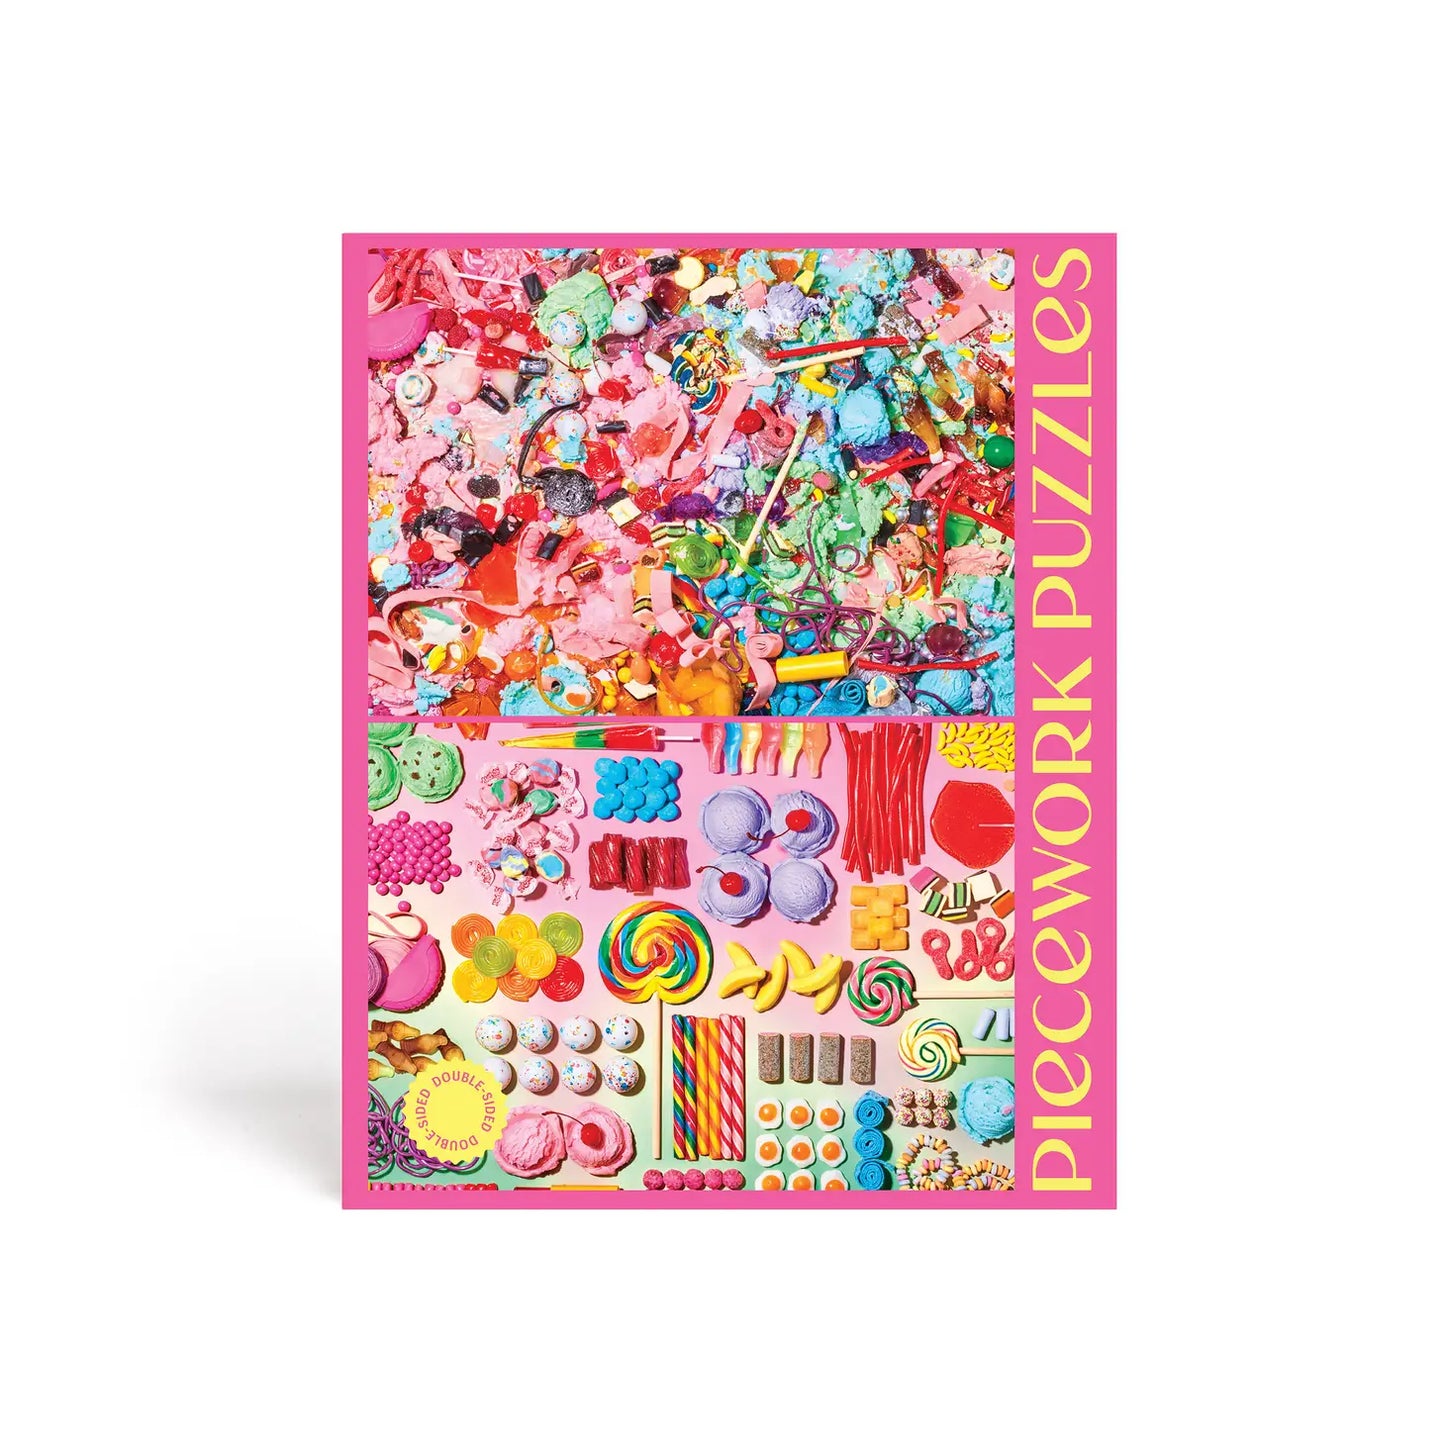 Sugar & Spice Double Sided 1000 Piece Jigsaw Puzzle